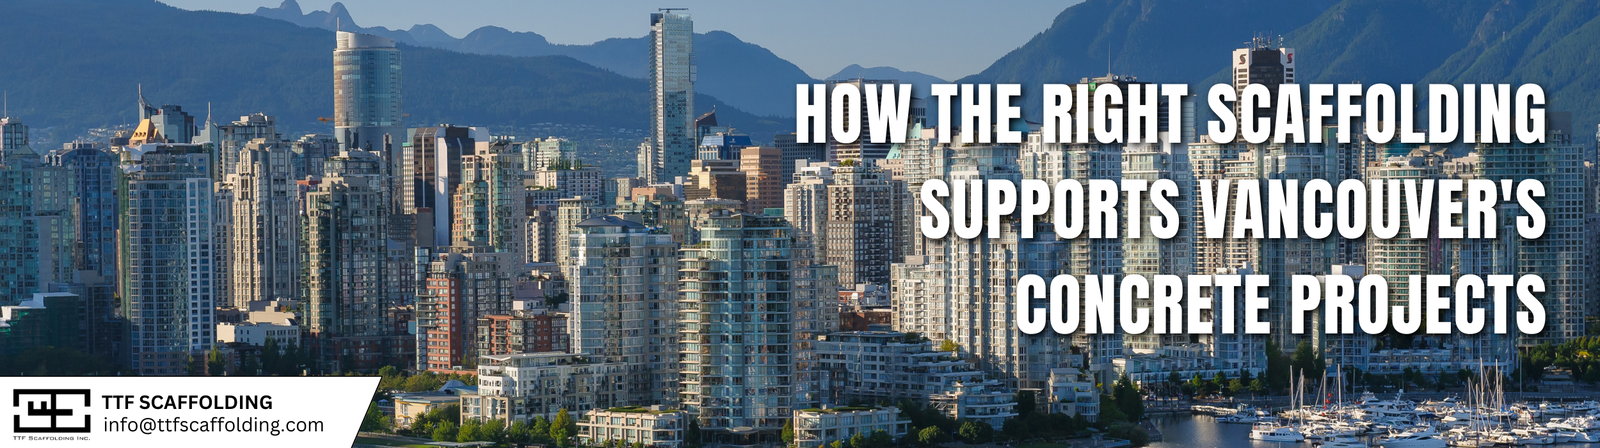 How the Right Scaffolding Supports Vancouver's Concrete Projects